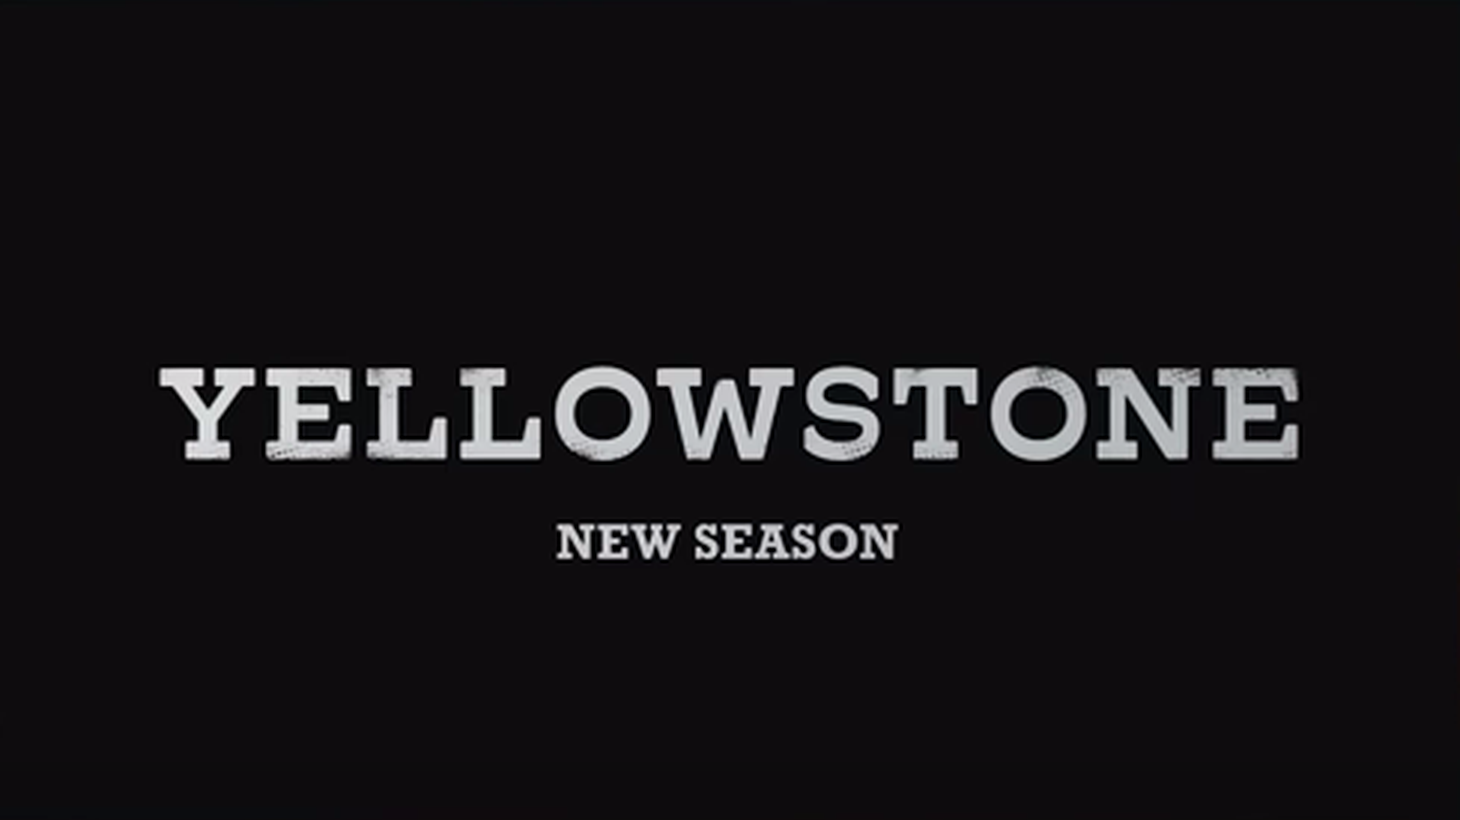 “Yellowstone” is about the Dutton family, who control the U.S.’ biggest contiguous ranch.